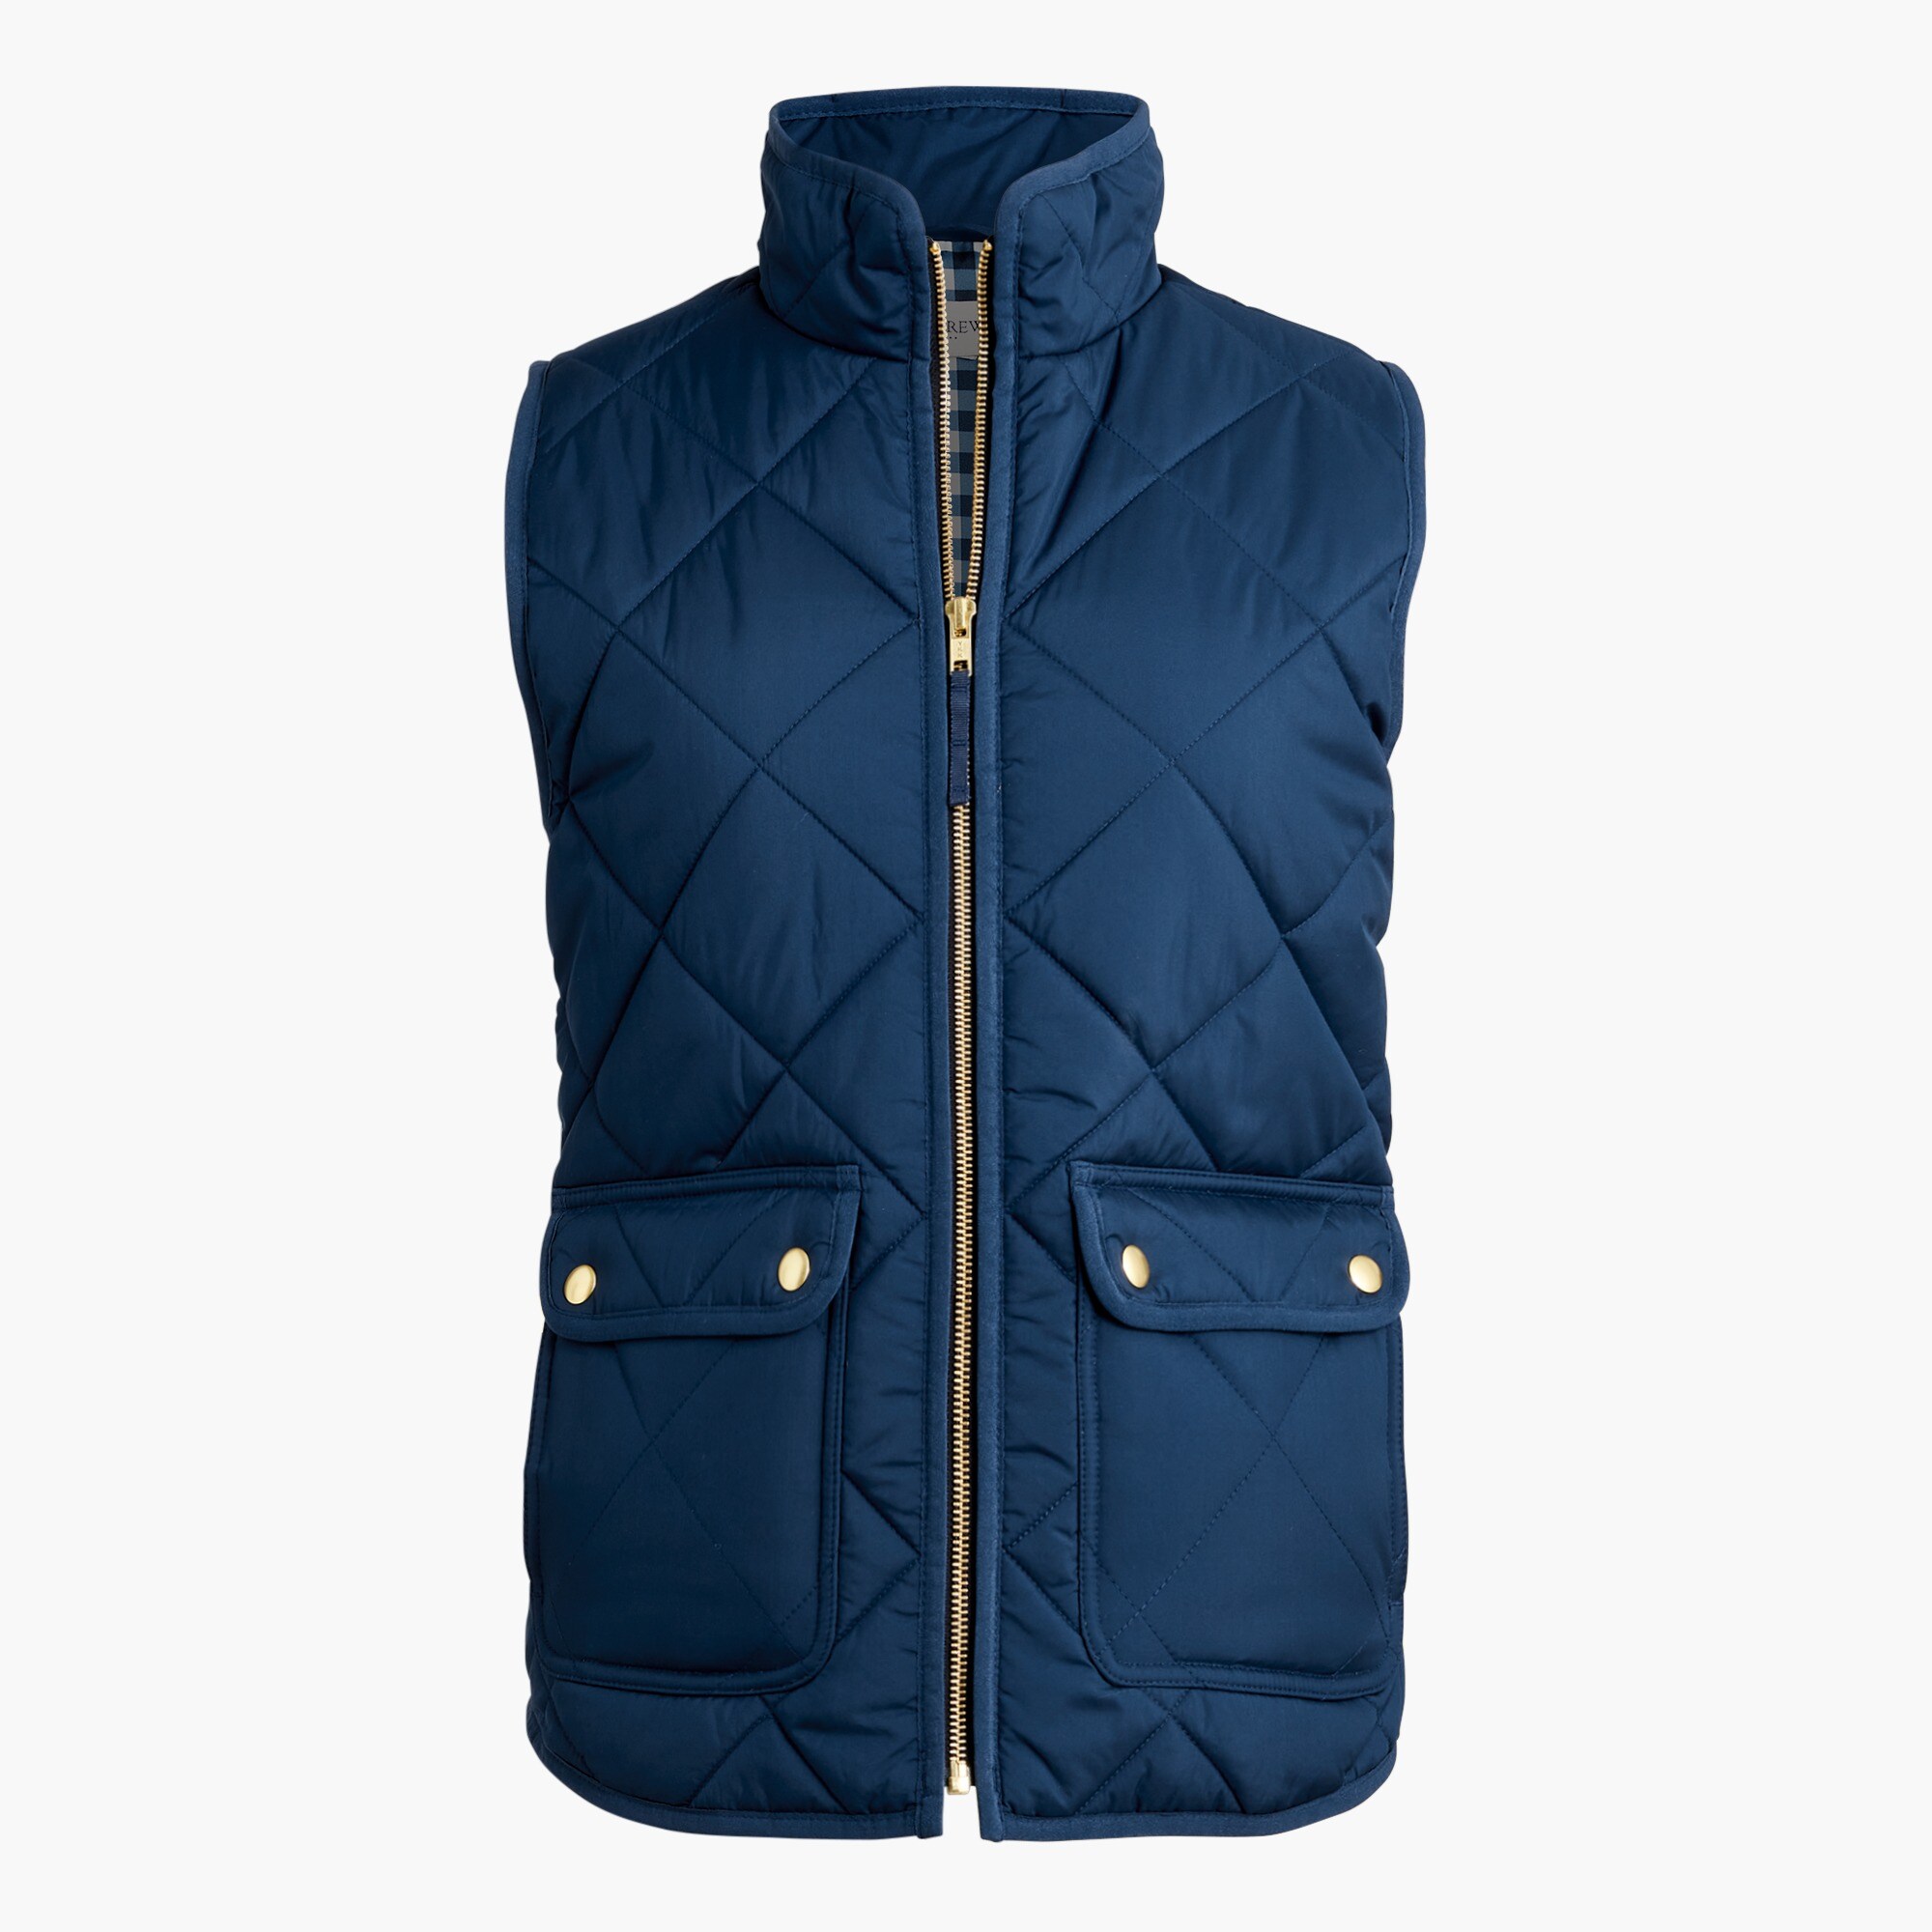  Puffer vest with snap pockets